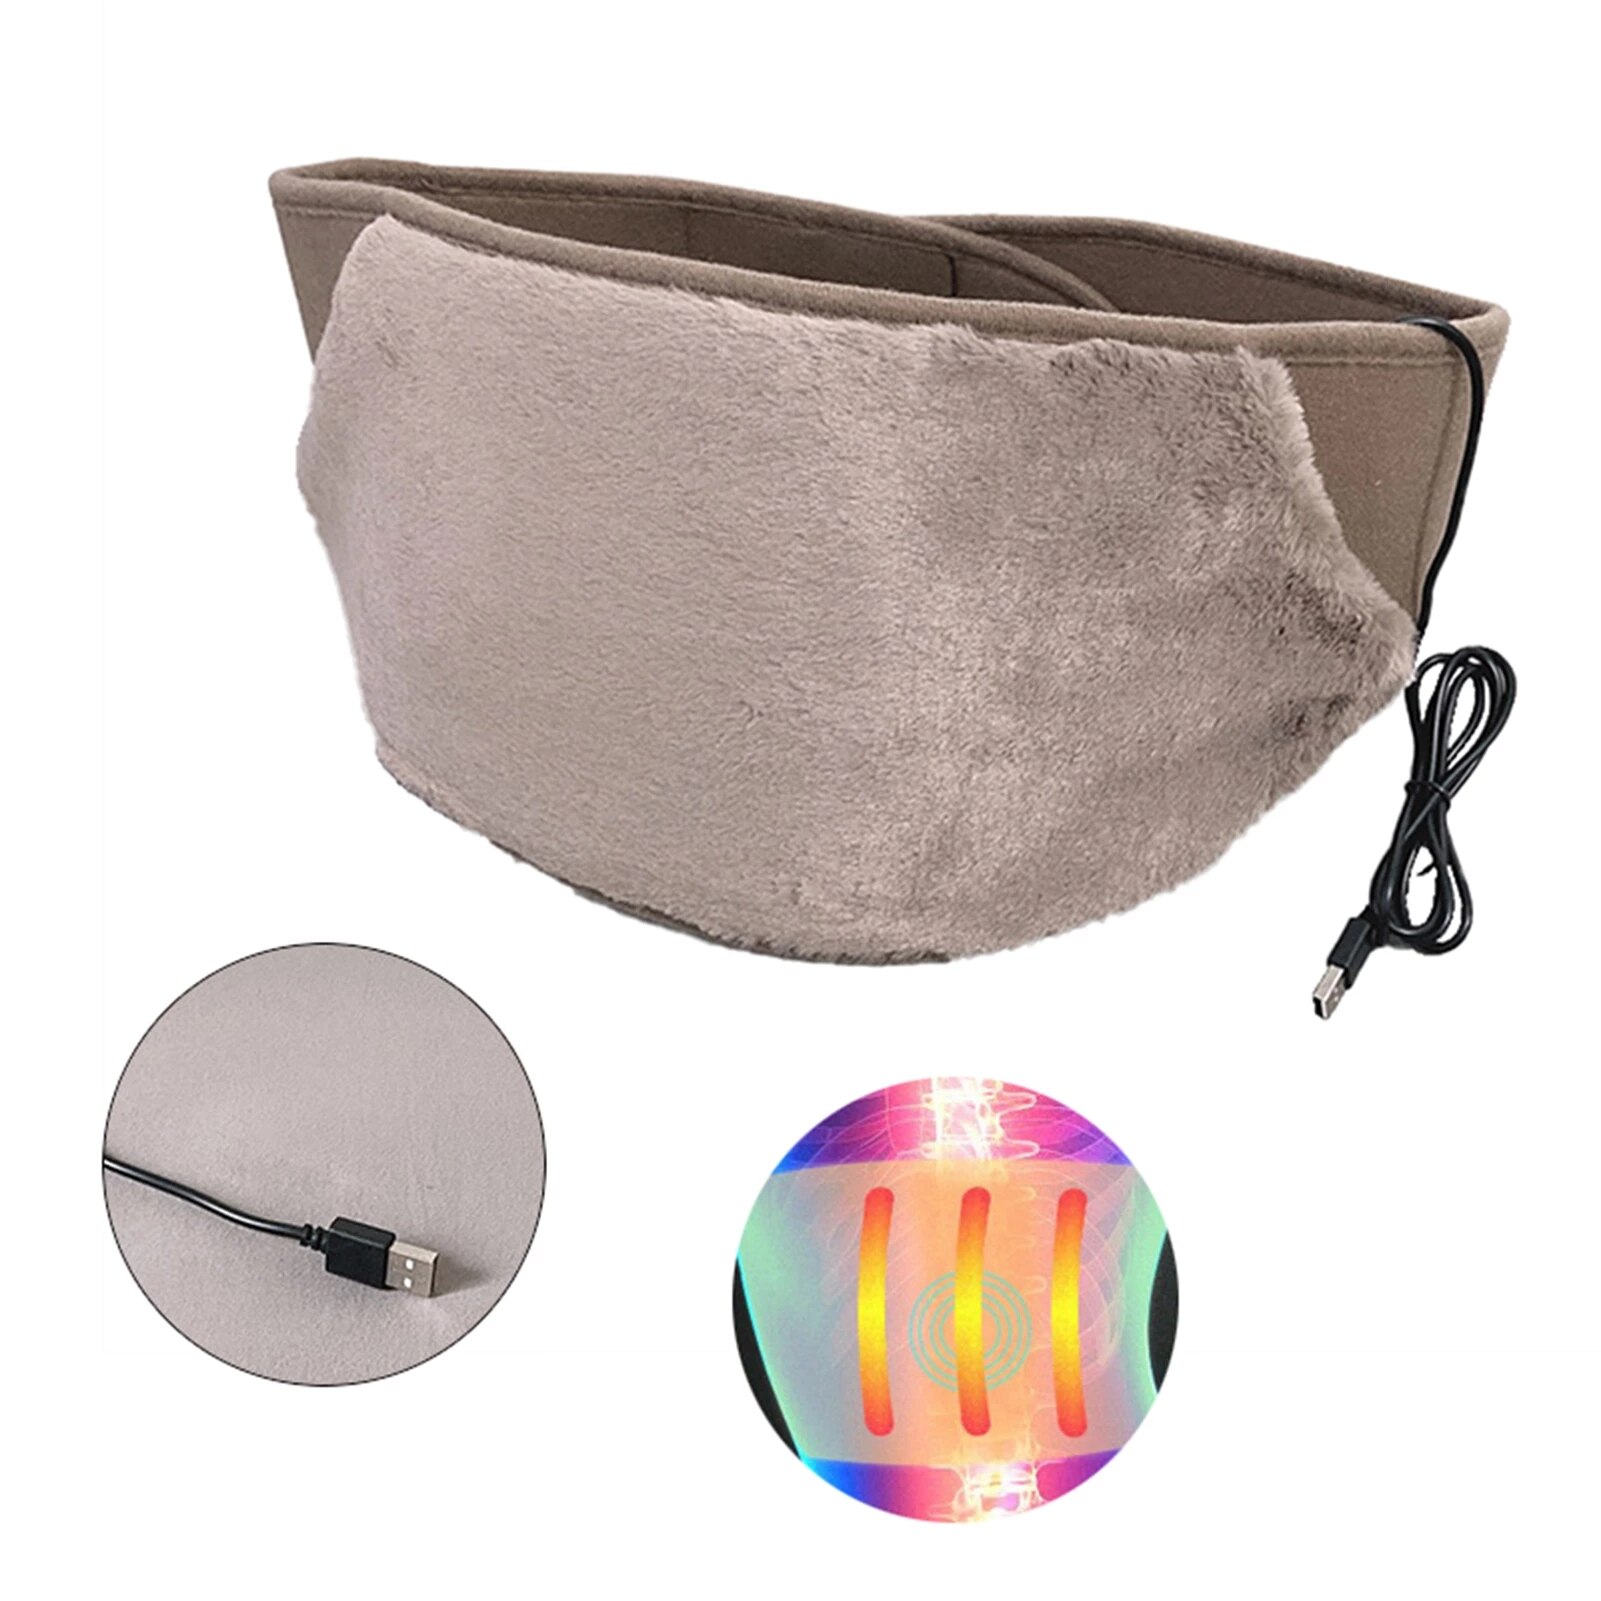 Heating Belt Adjustable Waist USB Electric Heating Magnetic Therapy For For Menstrual Cramp Lumbar Abdominal Leg Pain Relief: Plush style